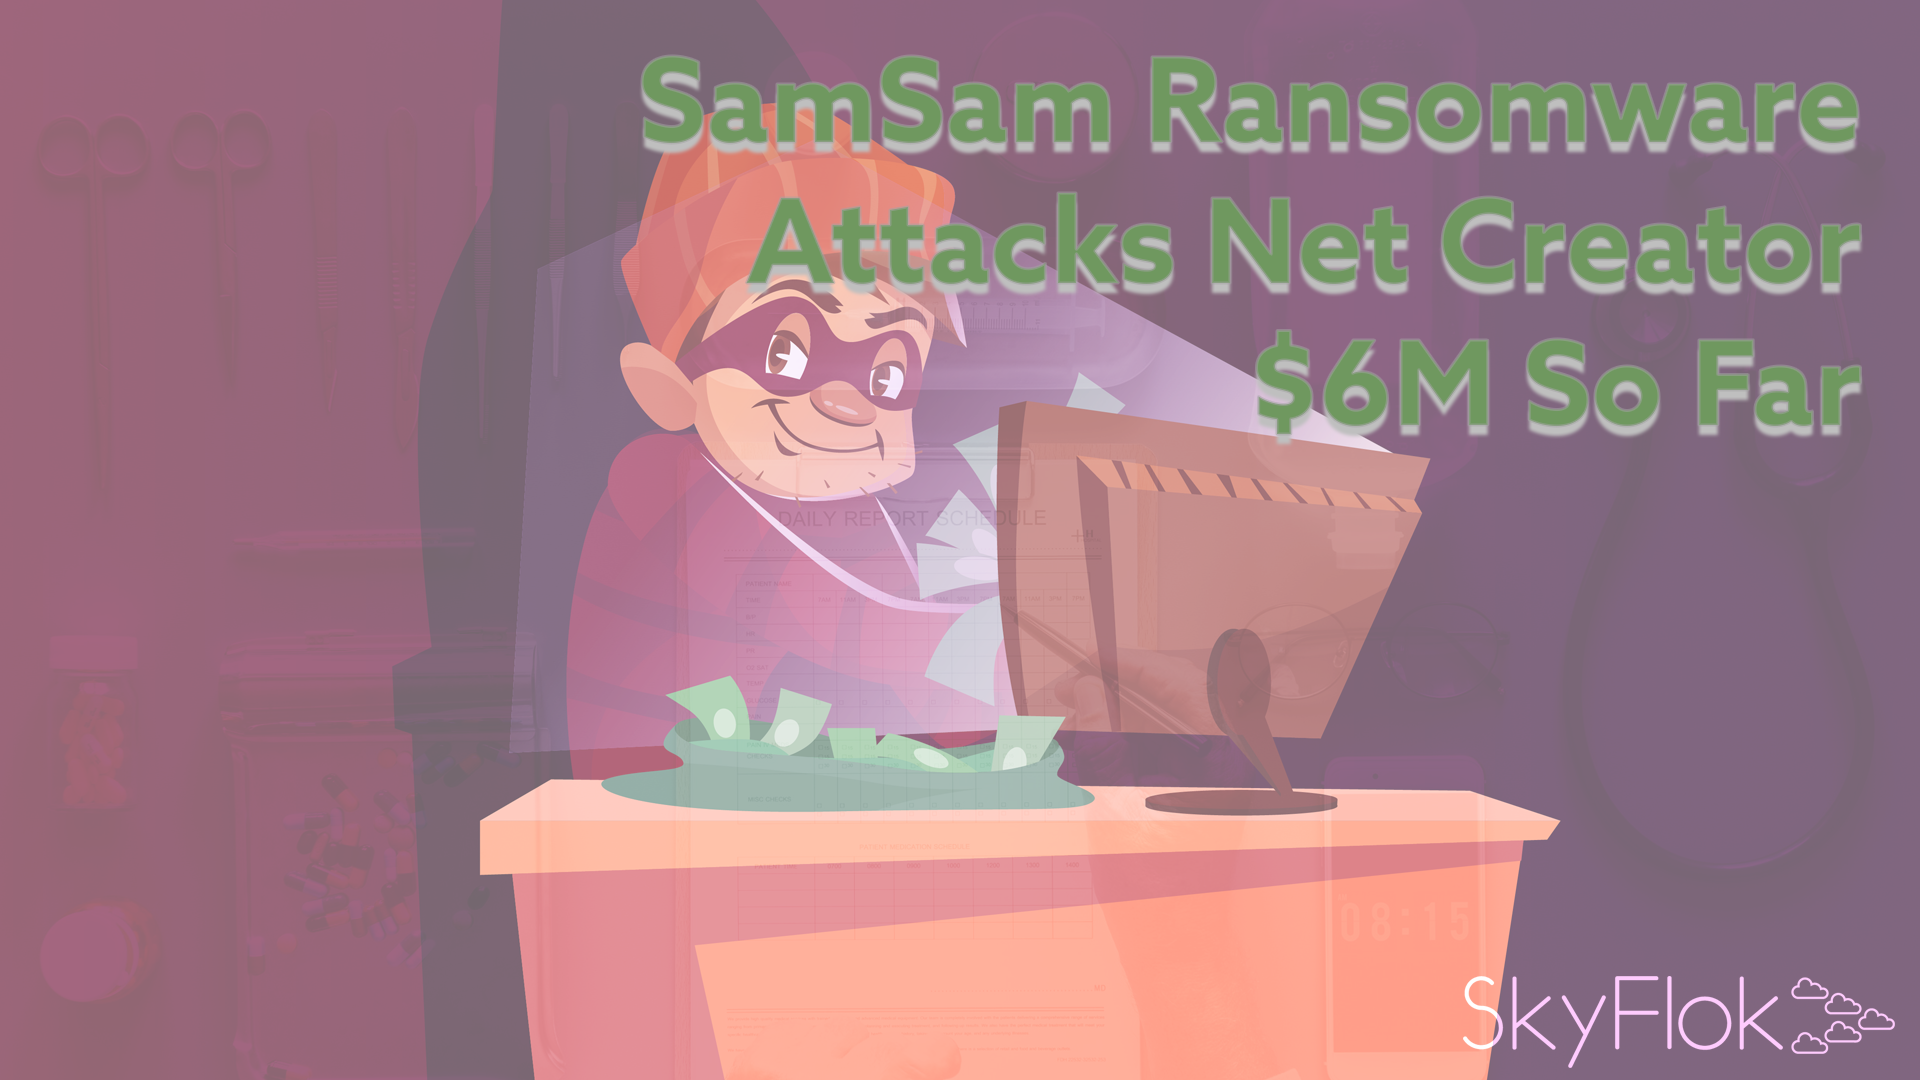 You are currently viewing SamSam Ransomware Attacks Net Creator $6M So Far